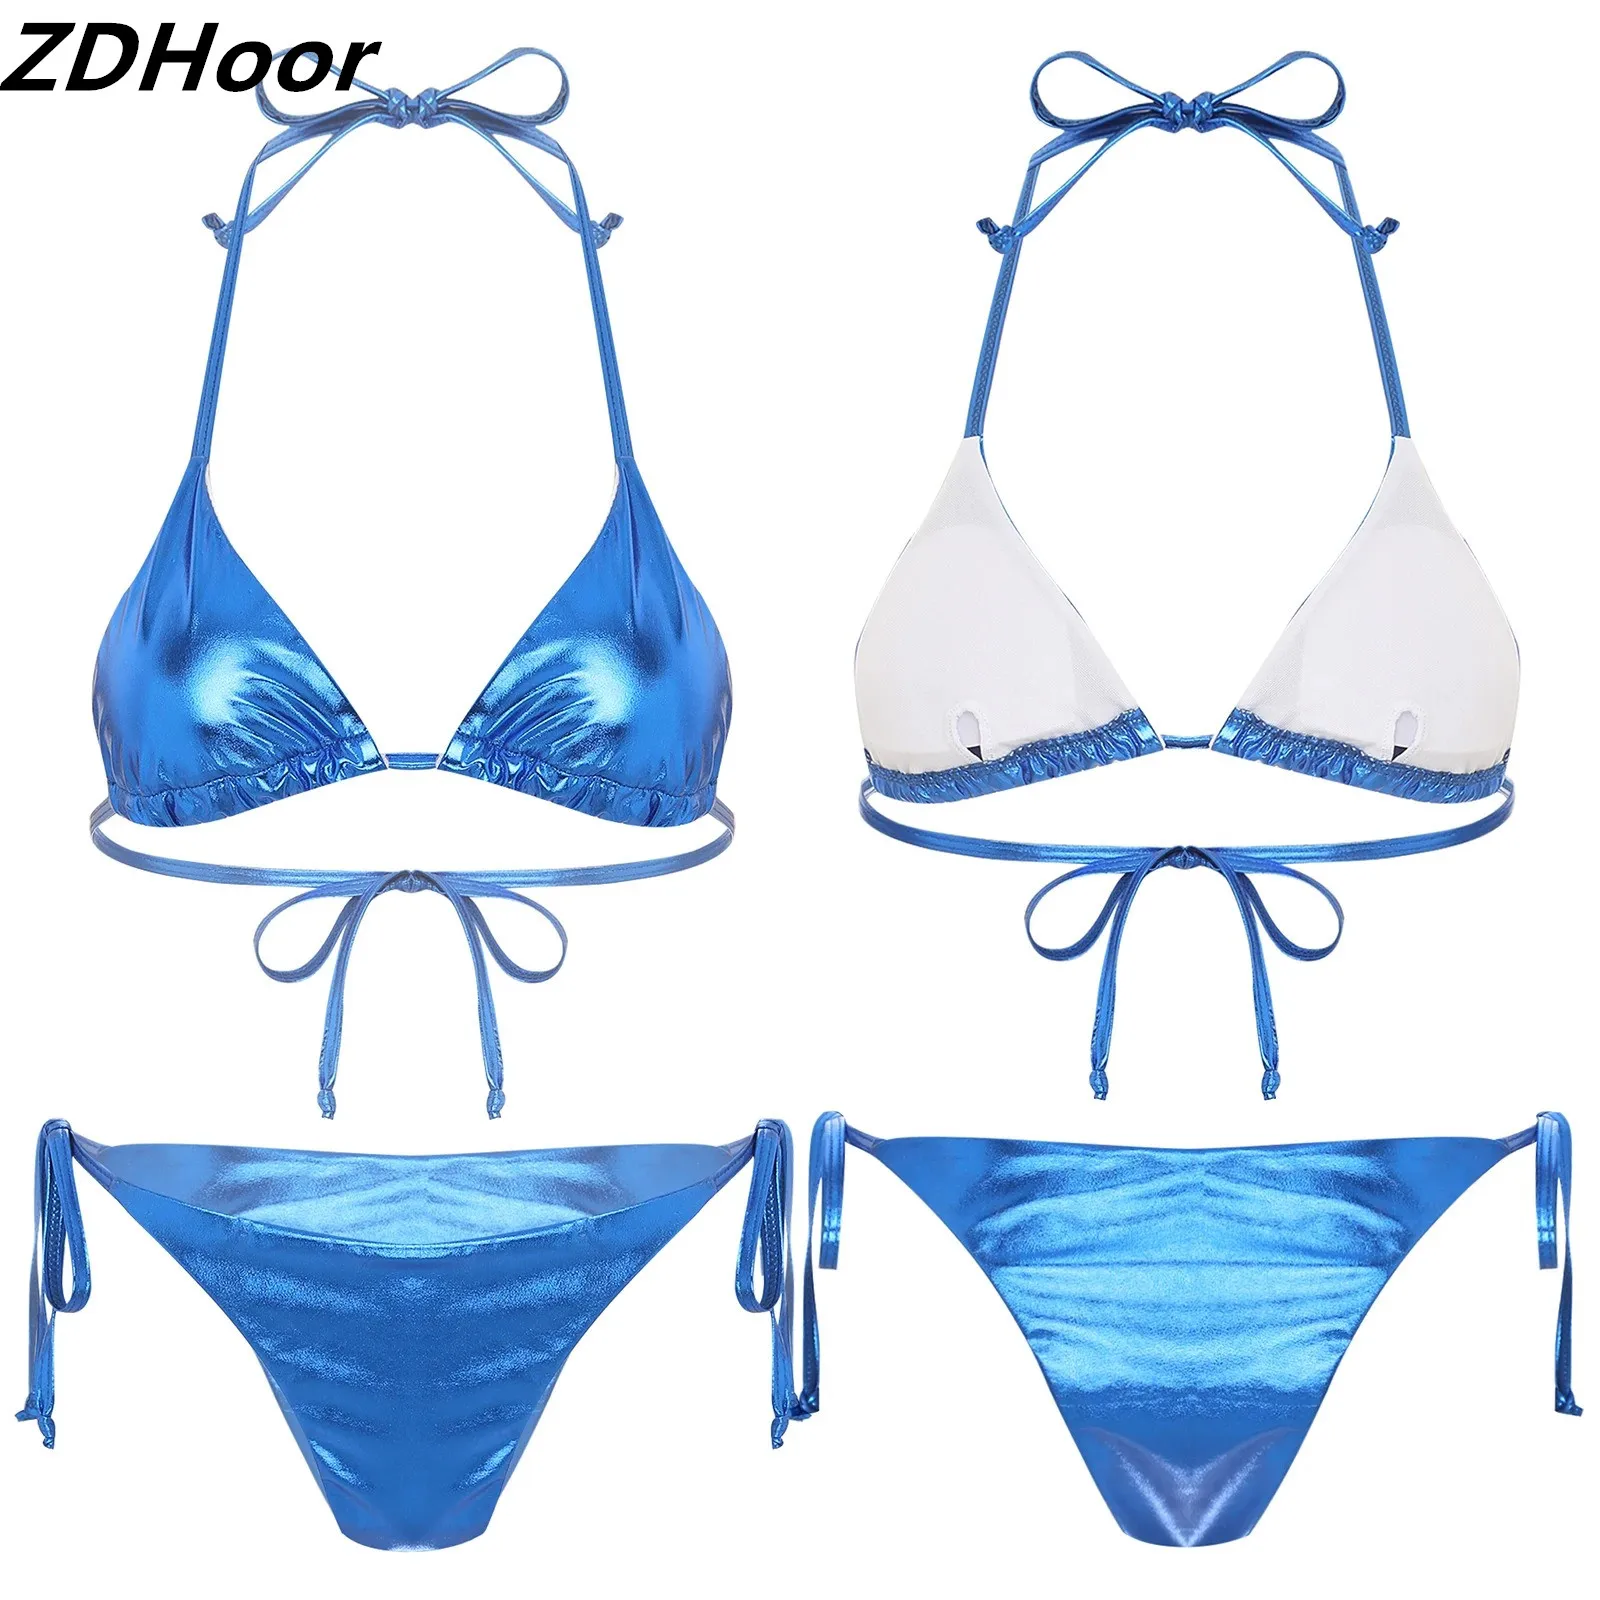 

Womens Metallic Shiny Lacing Bikini Set Padded Triangle Cup Top with Briefs 2-Piece Sexy Bathing Suit for Tropical Vacation